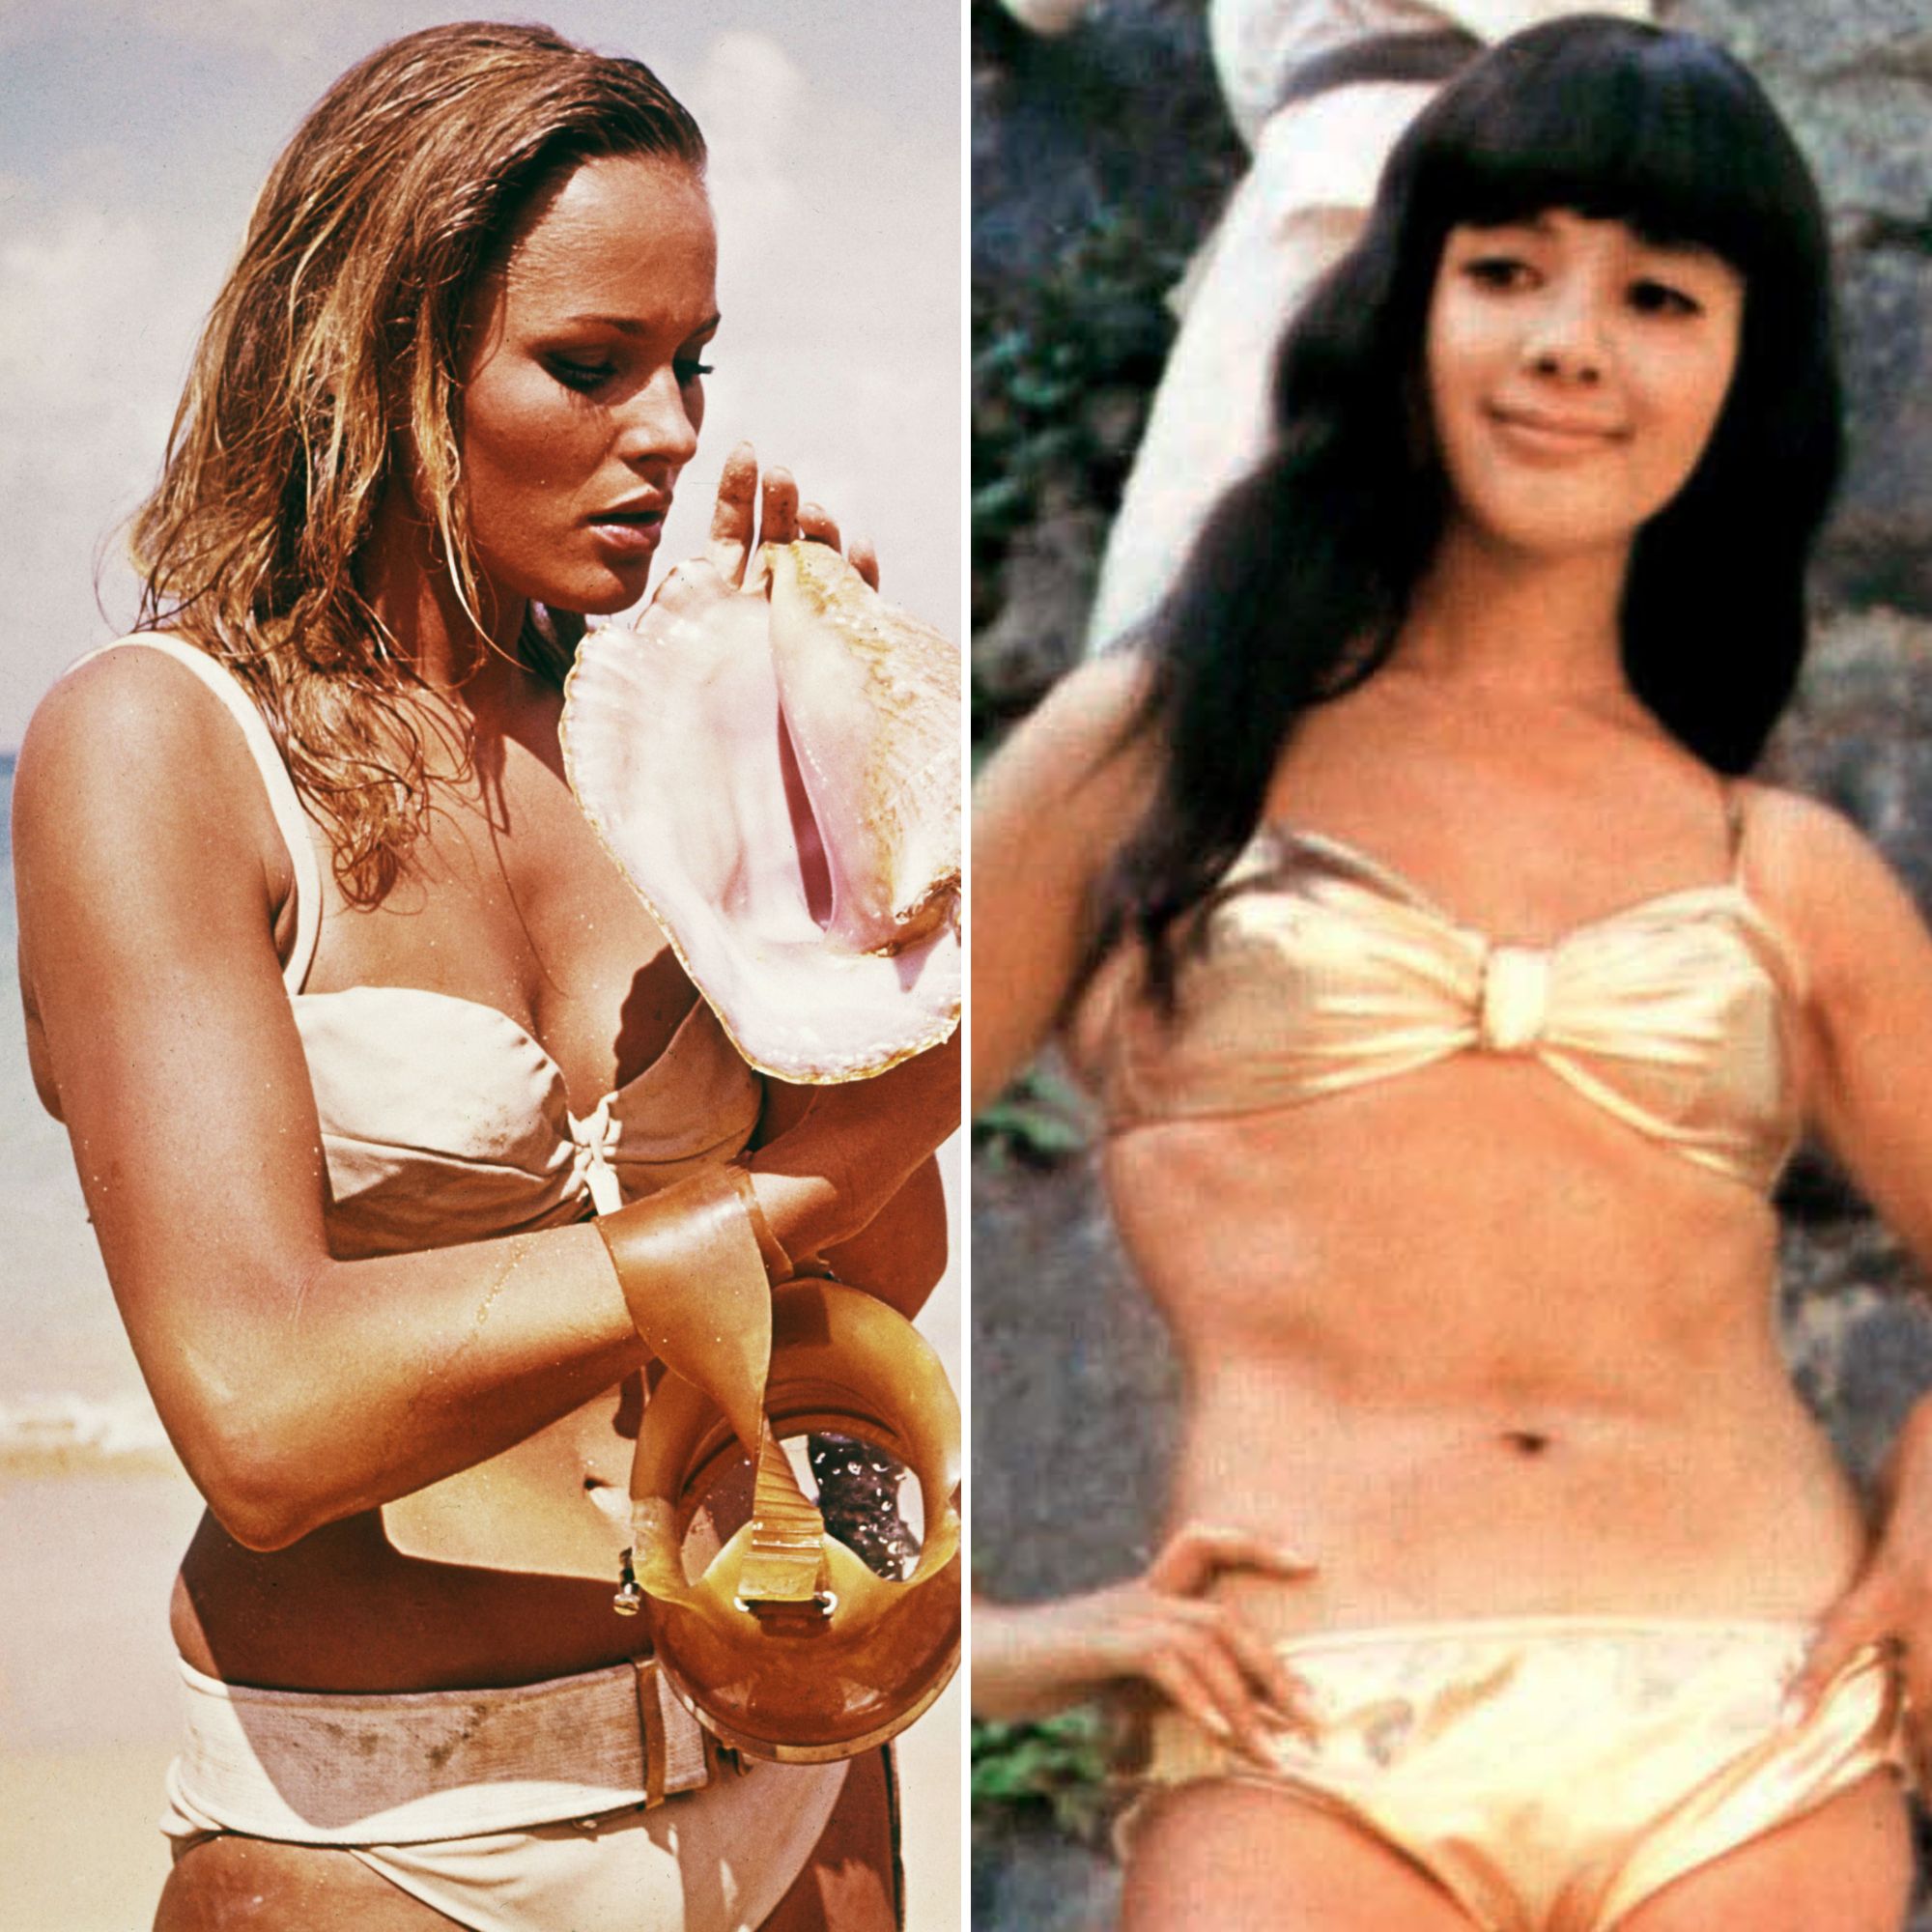 Bond Girls Bikini Photos Their Sexiest Swimsuit Pictures picture photo